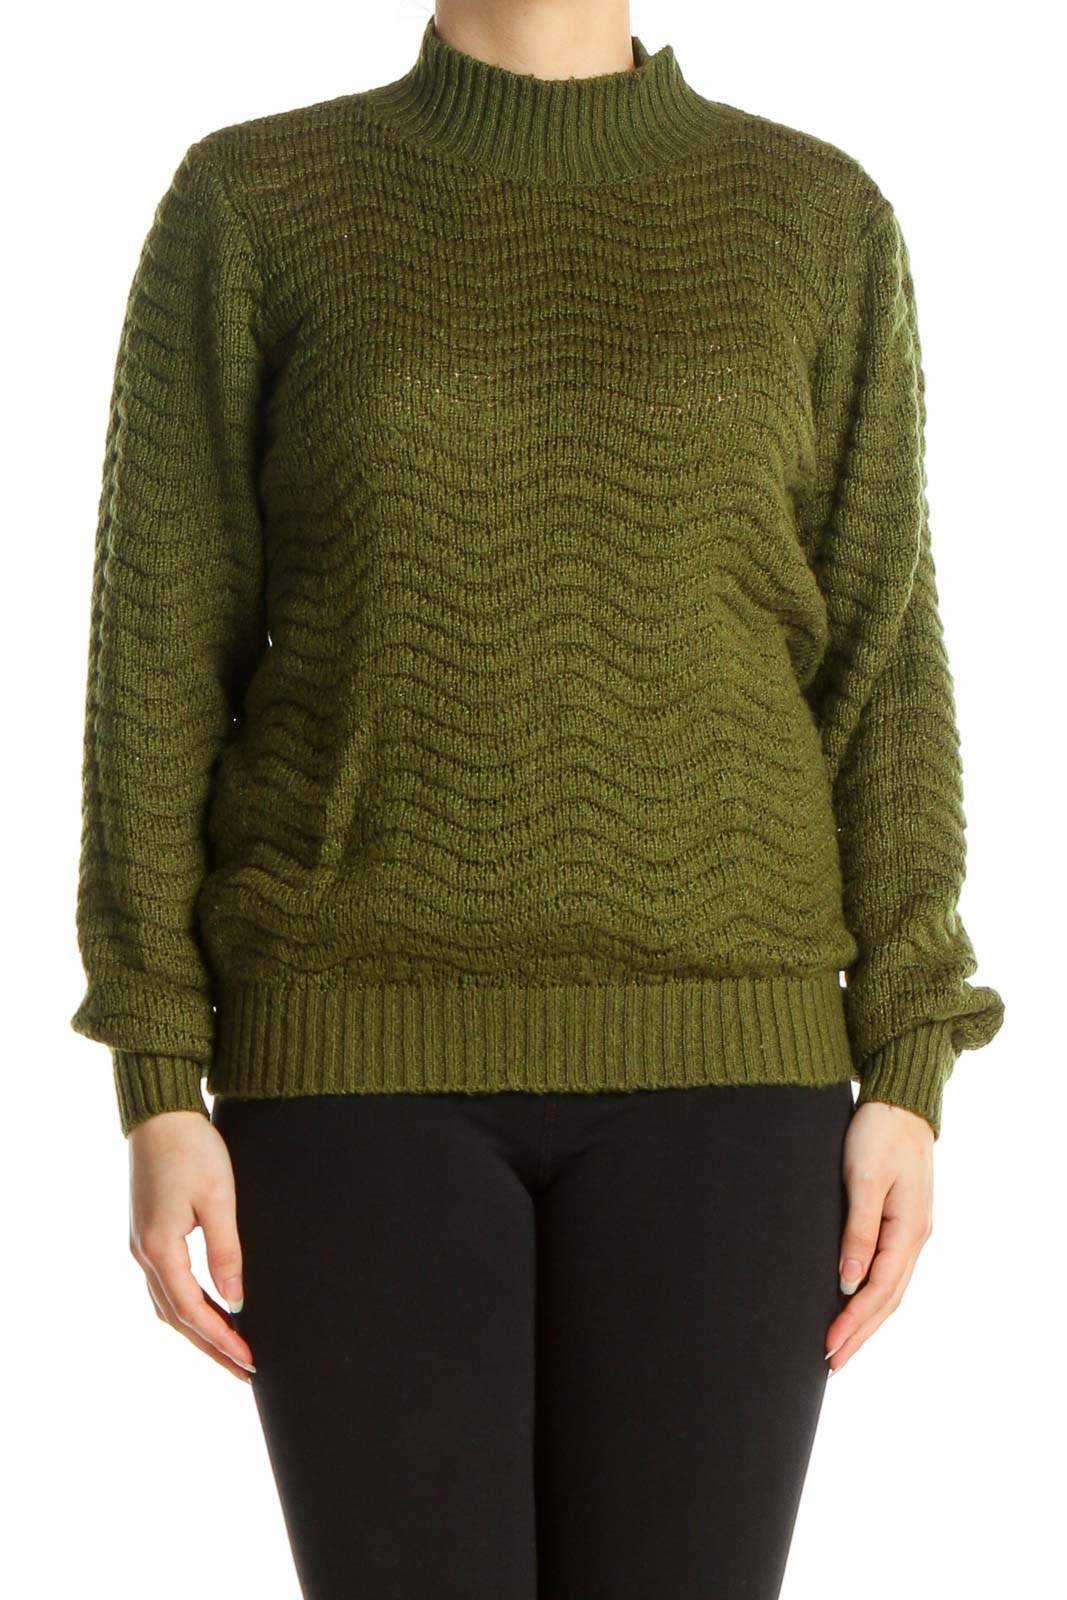 Green Textured All Day Wear Sweater Front